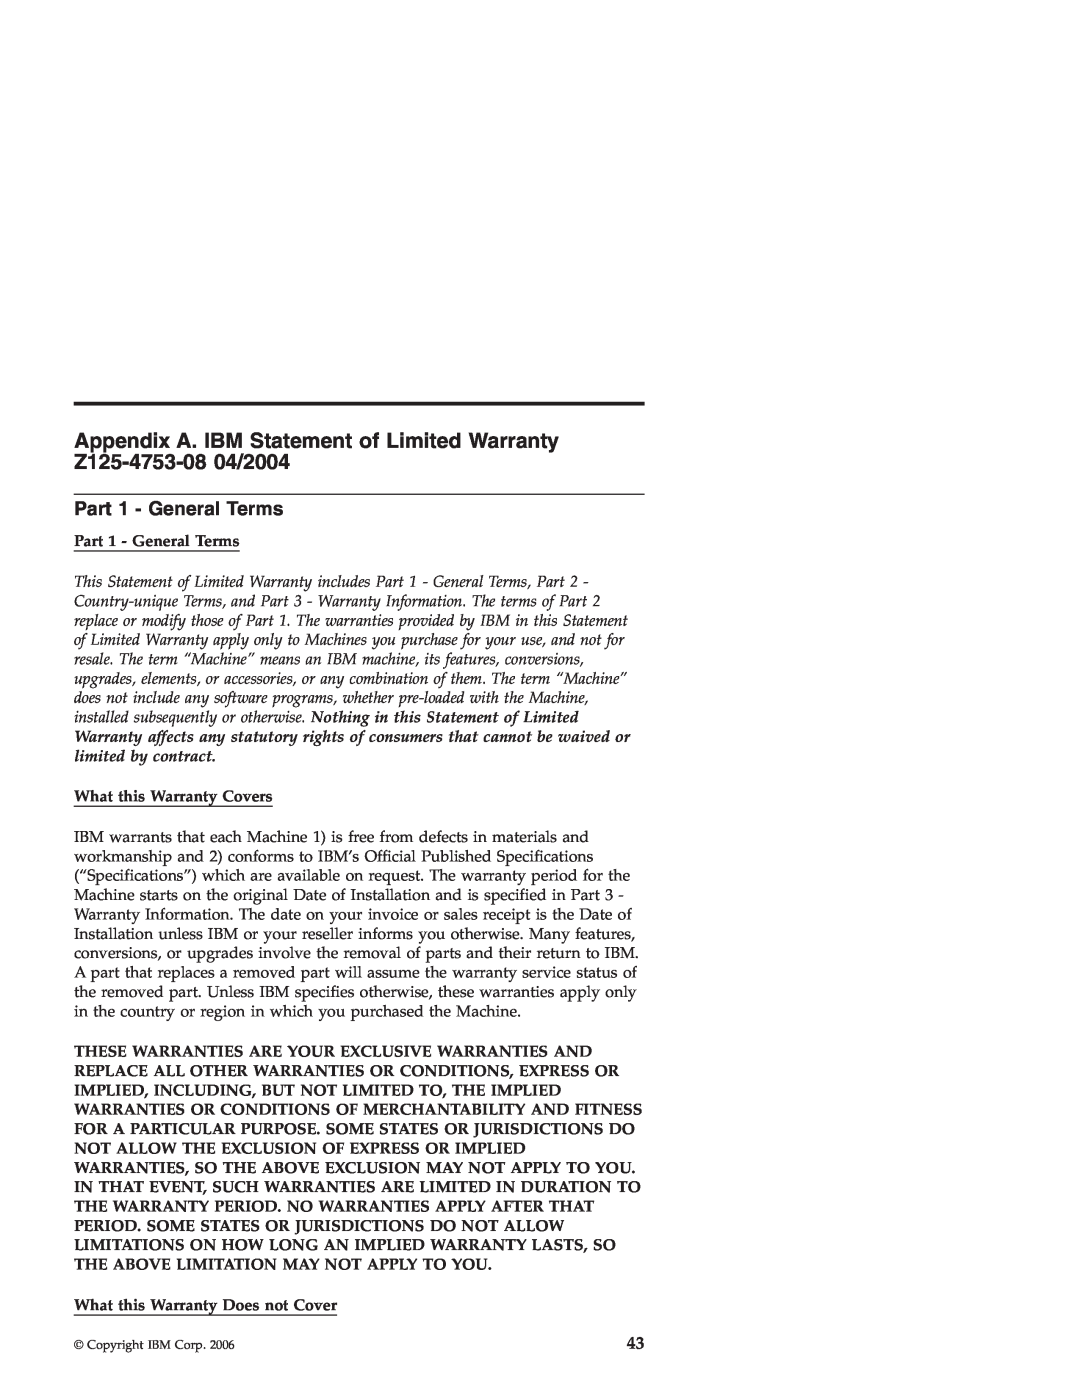 IBM Nortel 10 manual Appendix A. IBM Statement of Limited Warranty Z125-4753-08 04/2004, Part 1 - General Terms 